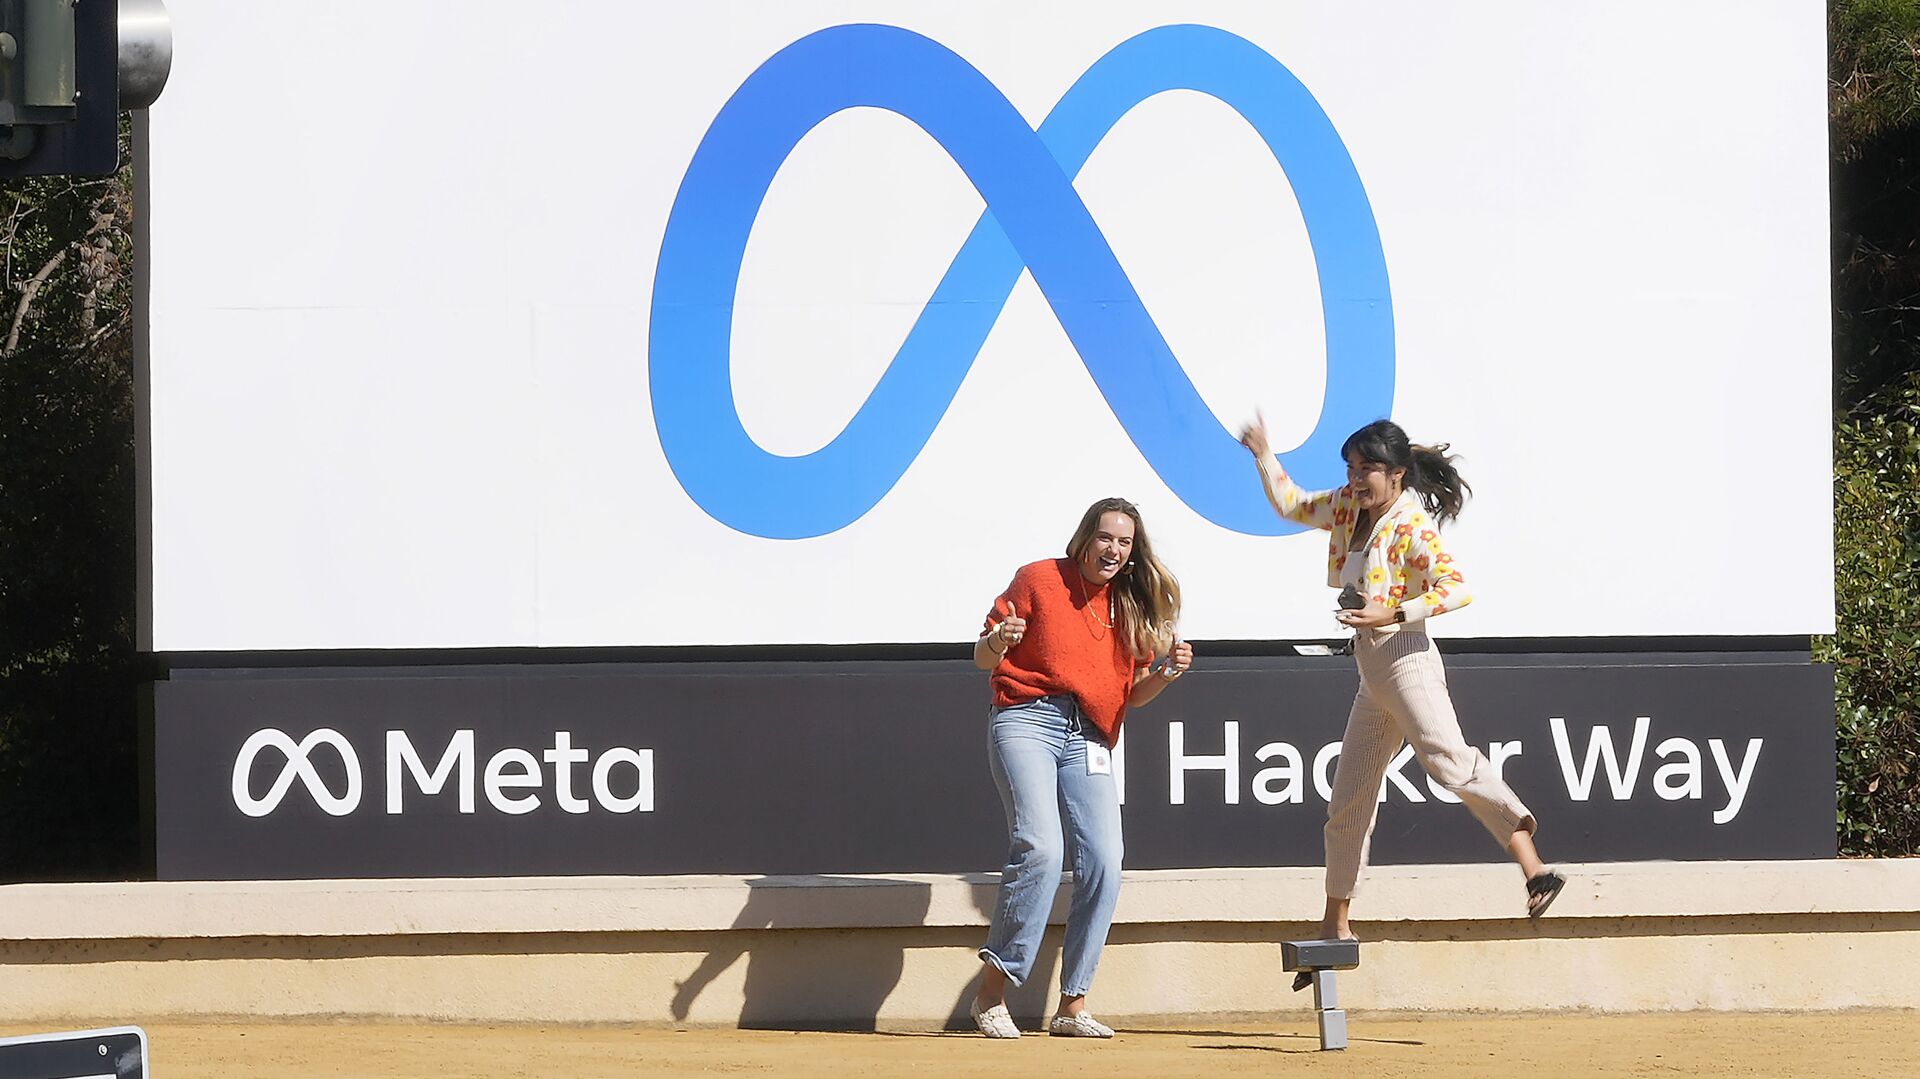 Facebook employees take a photo with the company's new name and logo outside its headquarters in Menlo Park, Calif., Thursday, Oct. 28, 2021, after the company announced that it is changing its name to Meta Platforms Inc.  - Sputnik International, 1920, 23.12.2021